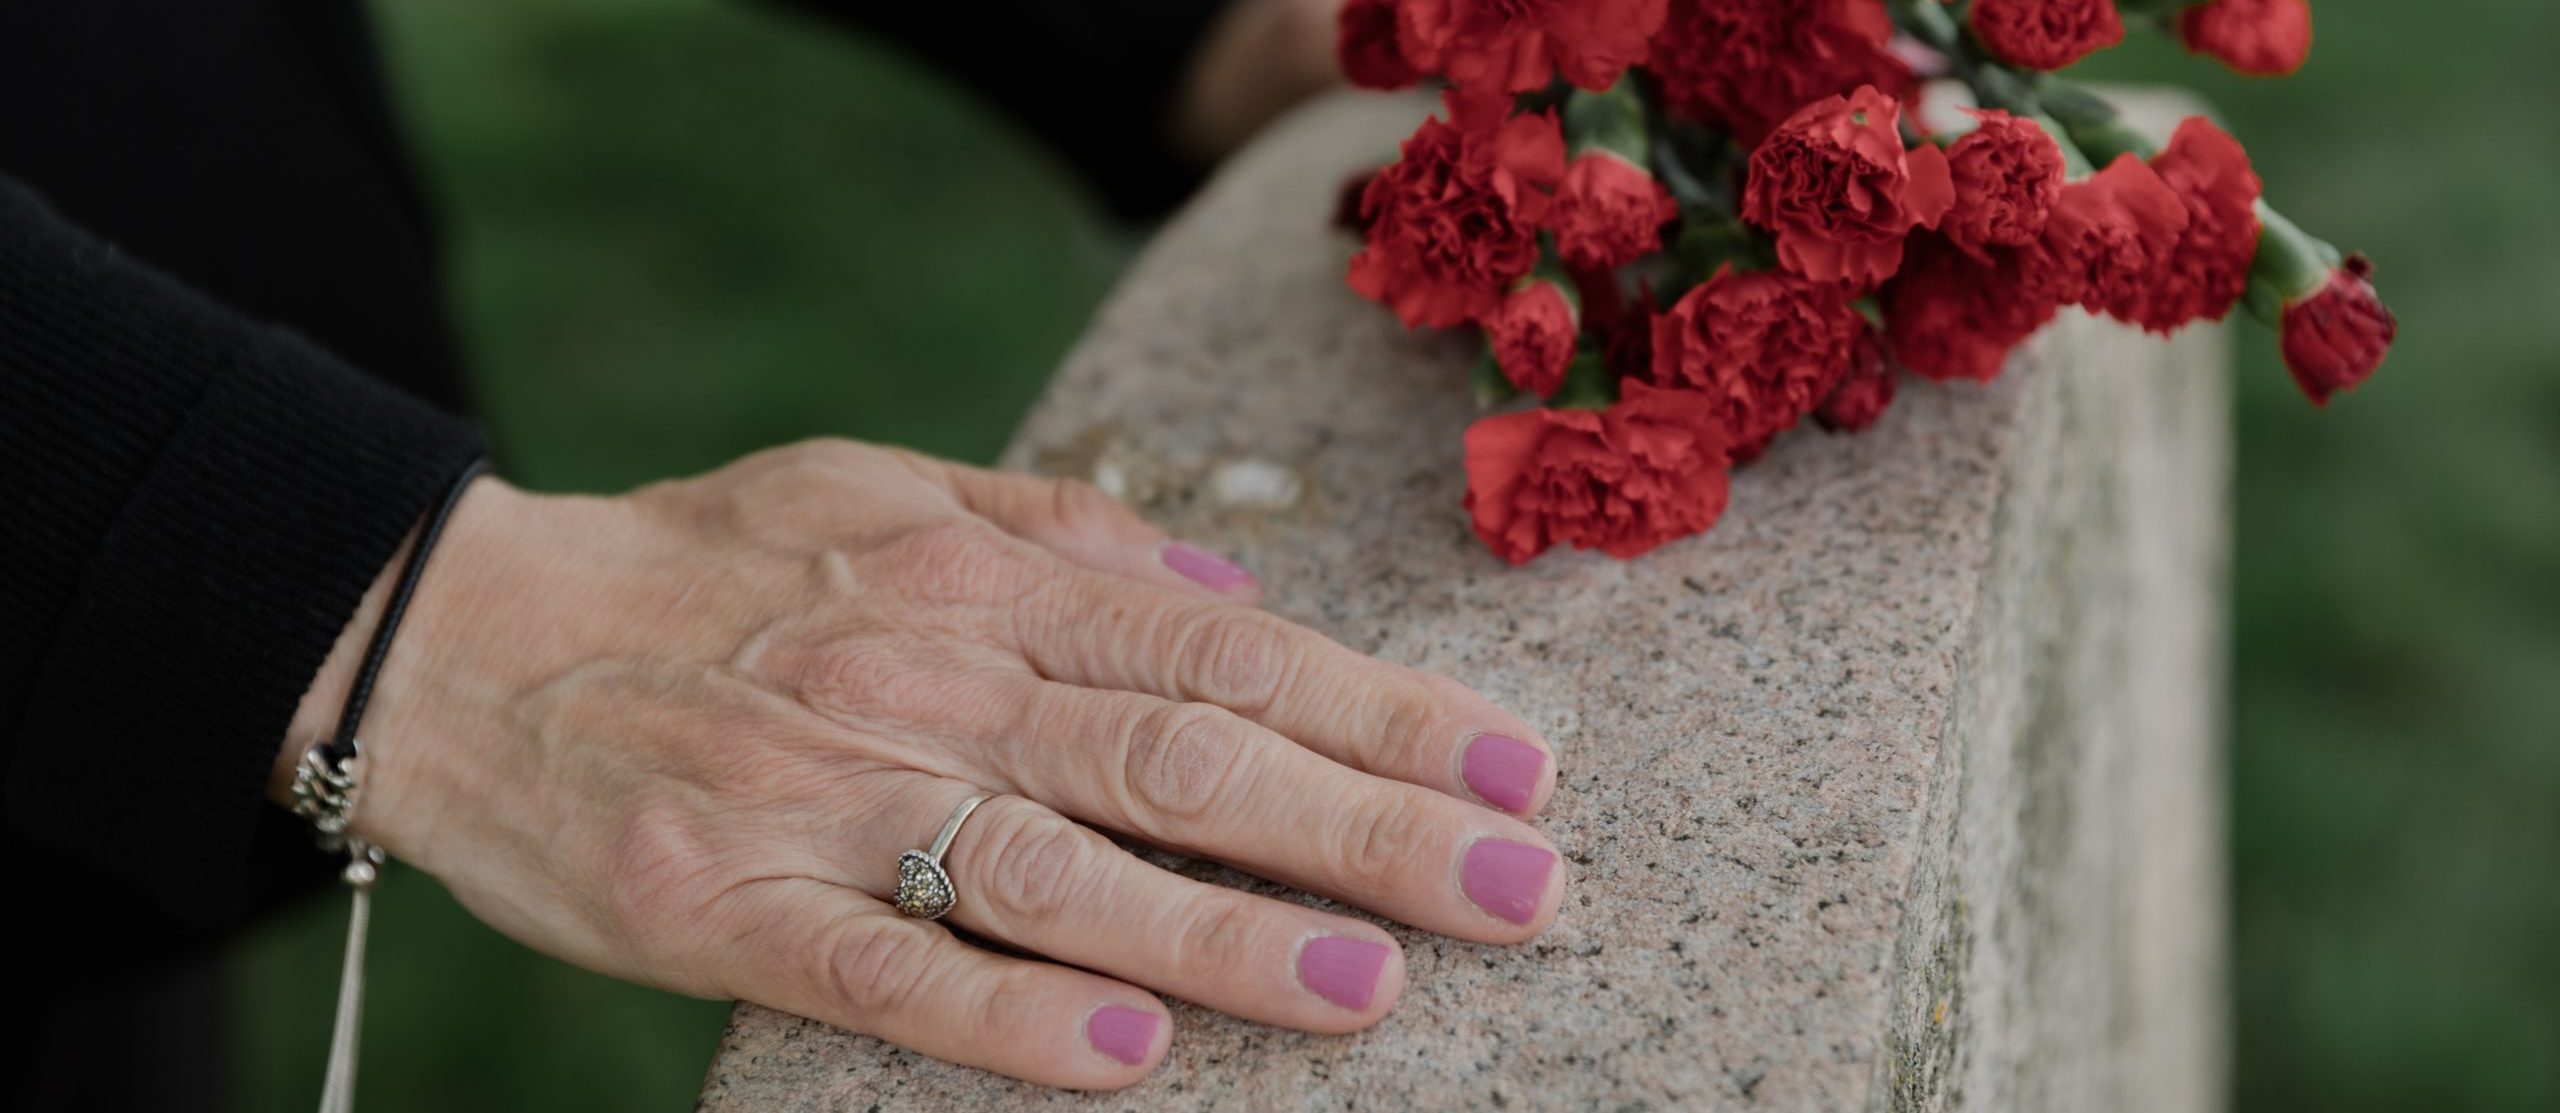 hand and flowers on a gravestone